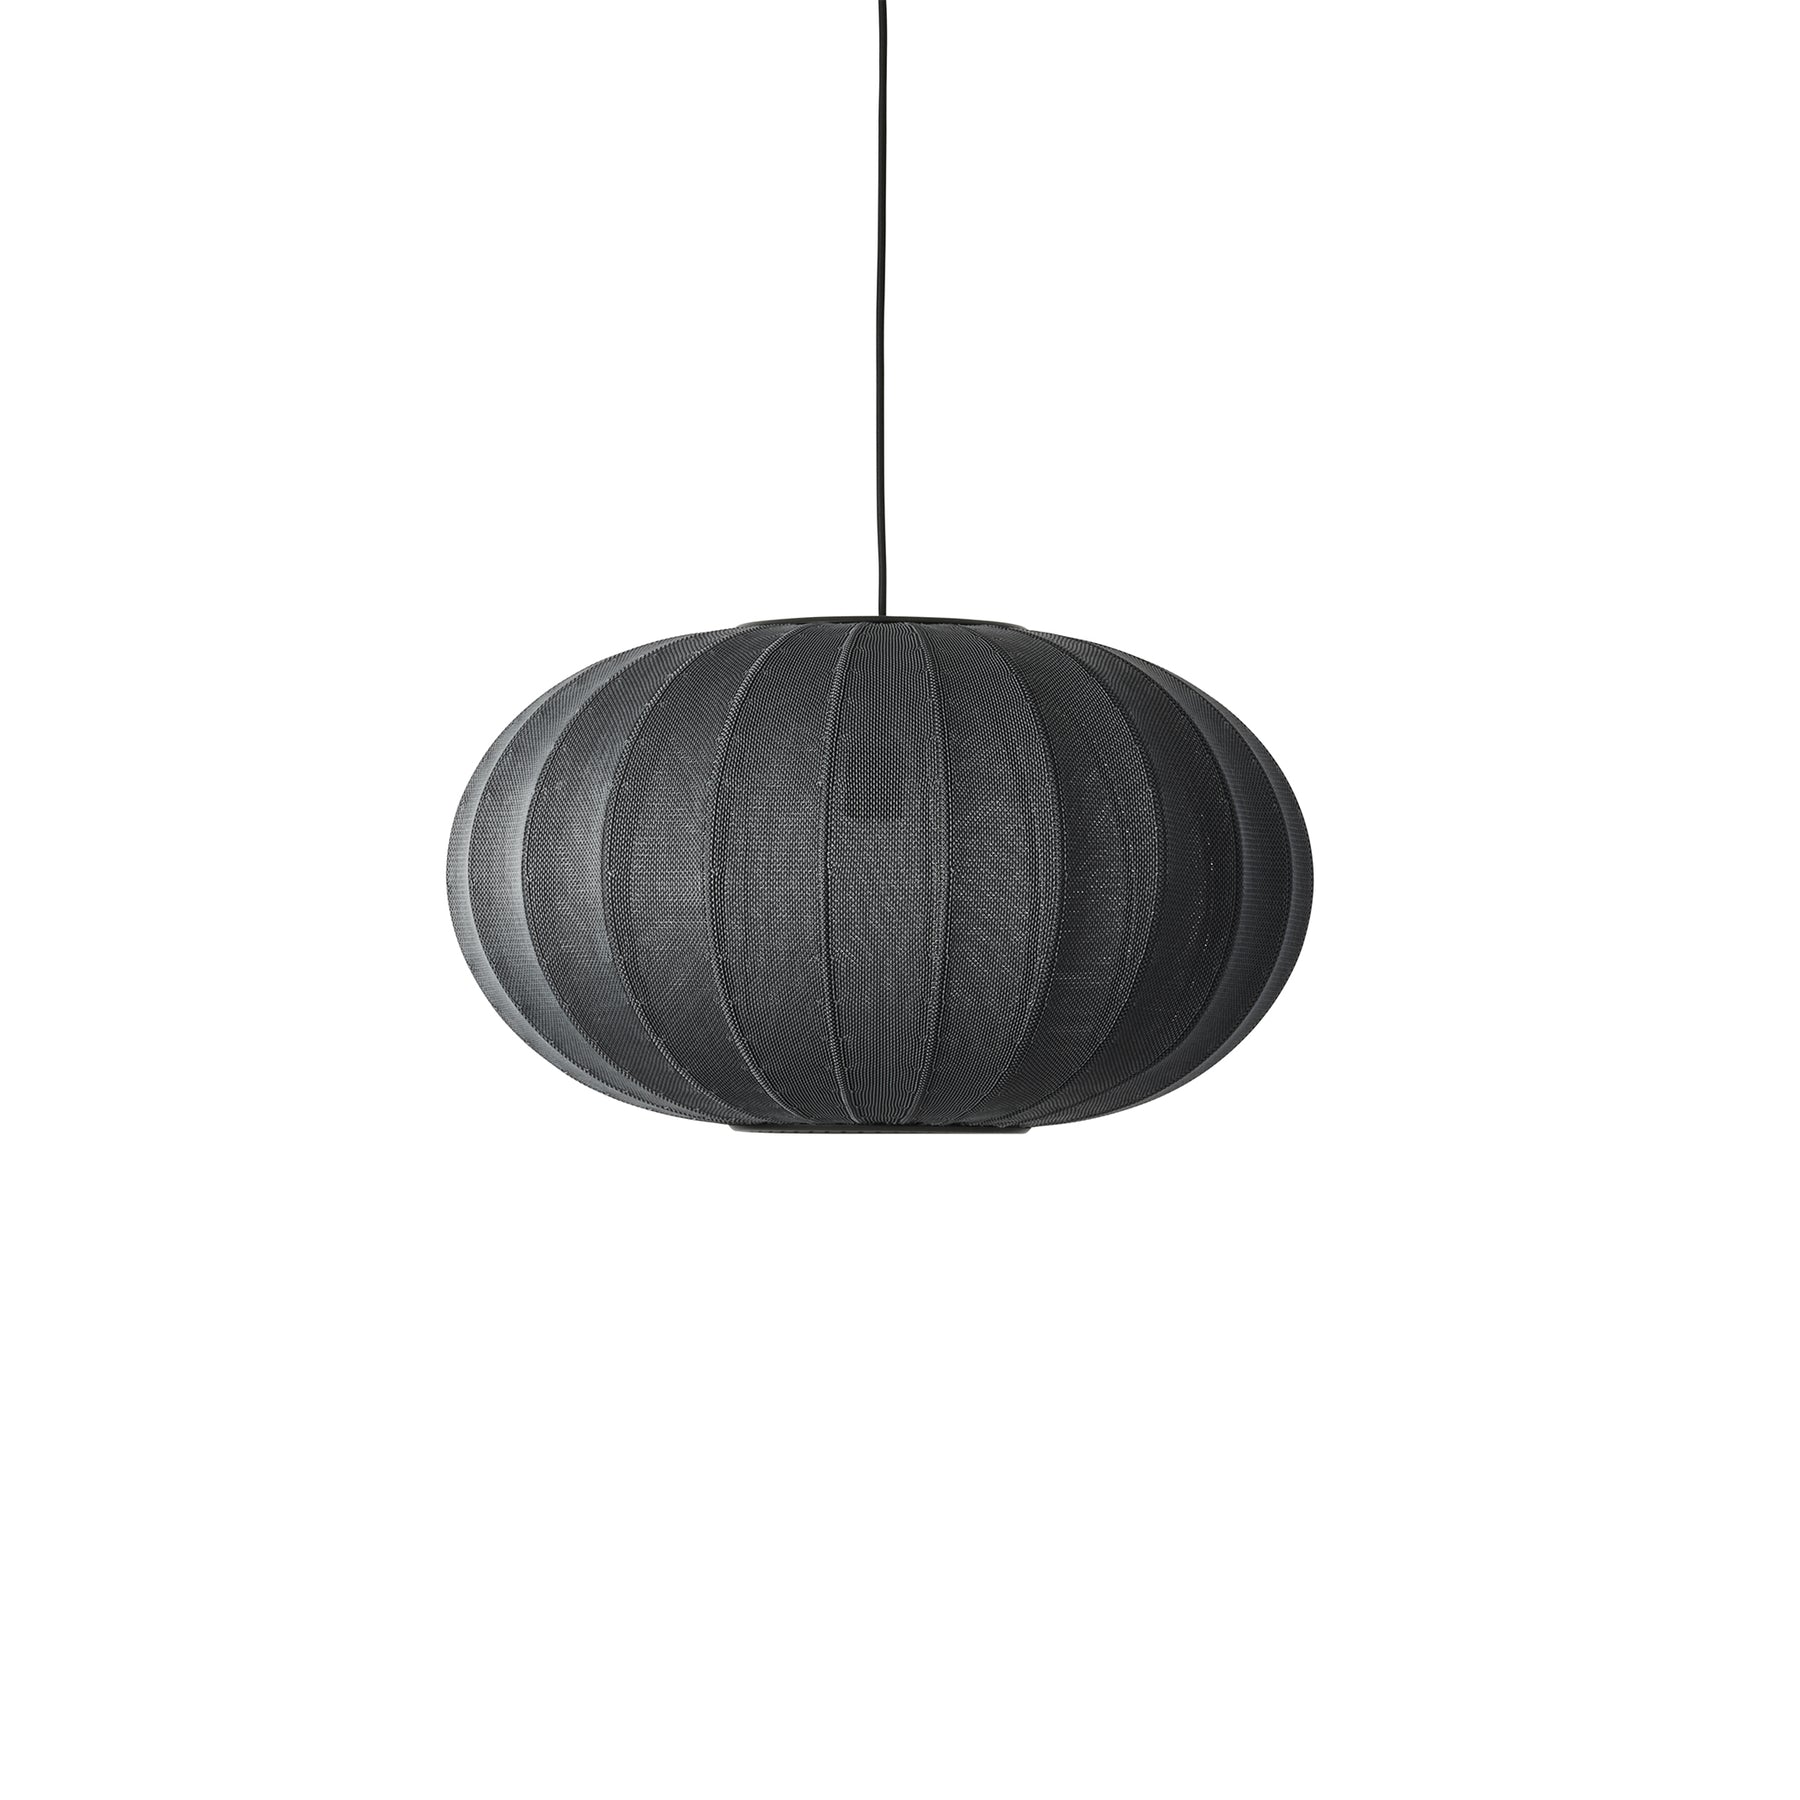 Made by Hand, Knit-Wit Oval Pendant Lamp 57, Blue Stone, Pendant, Iskos Berlin,